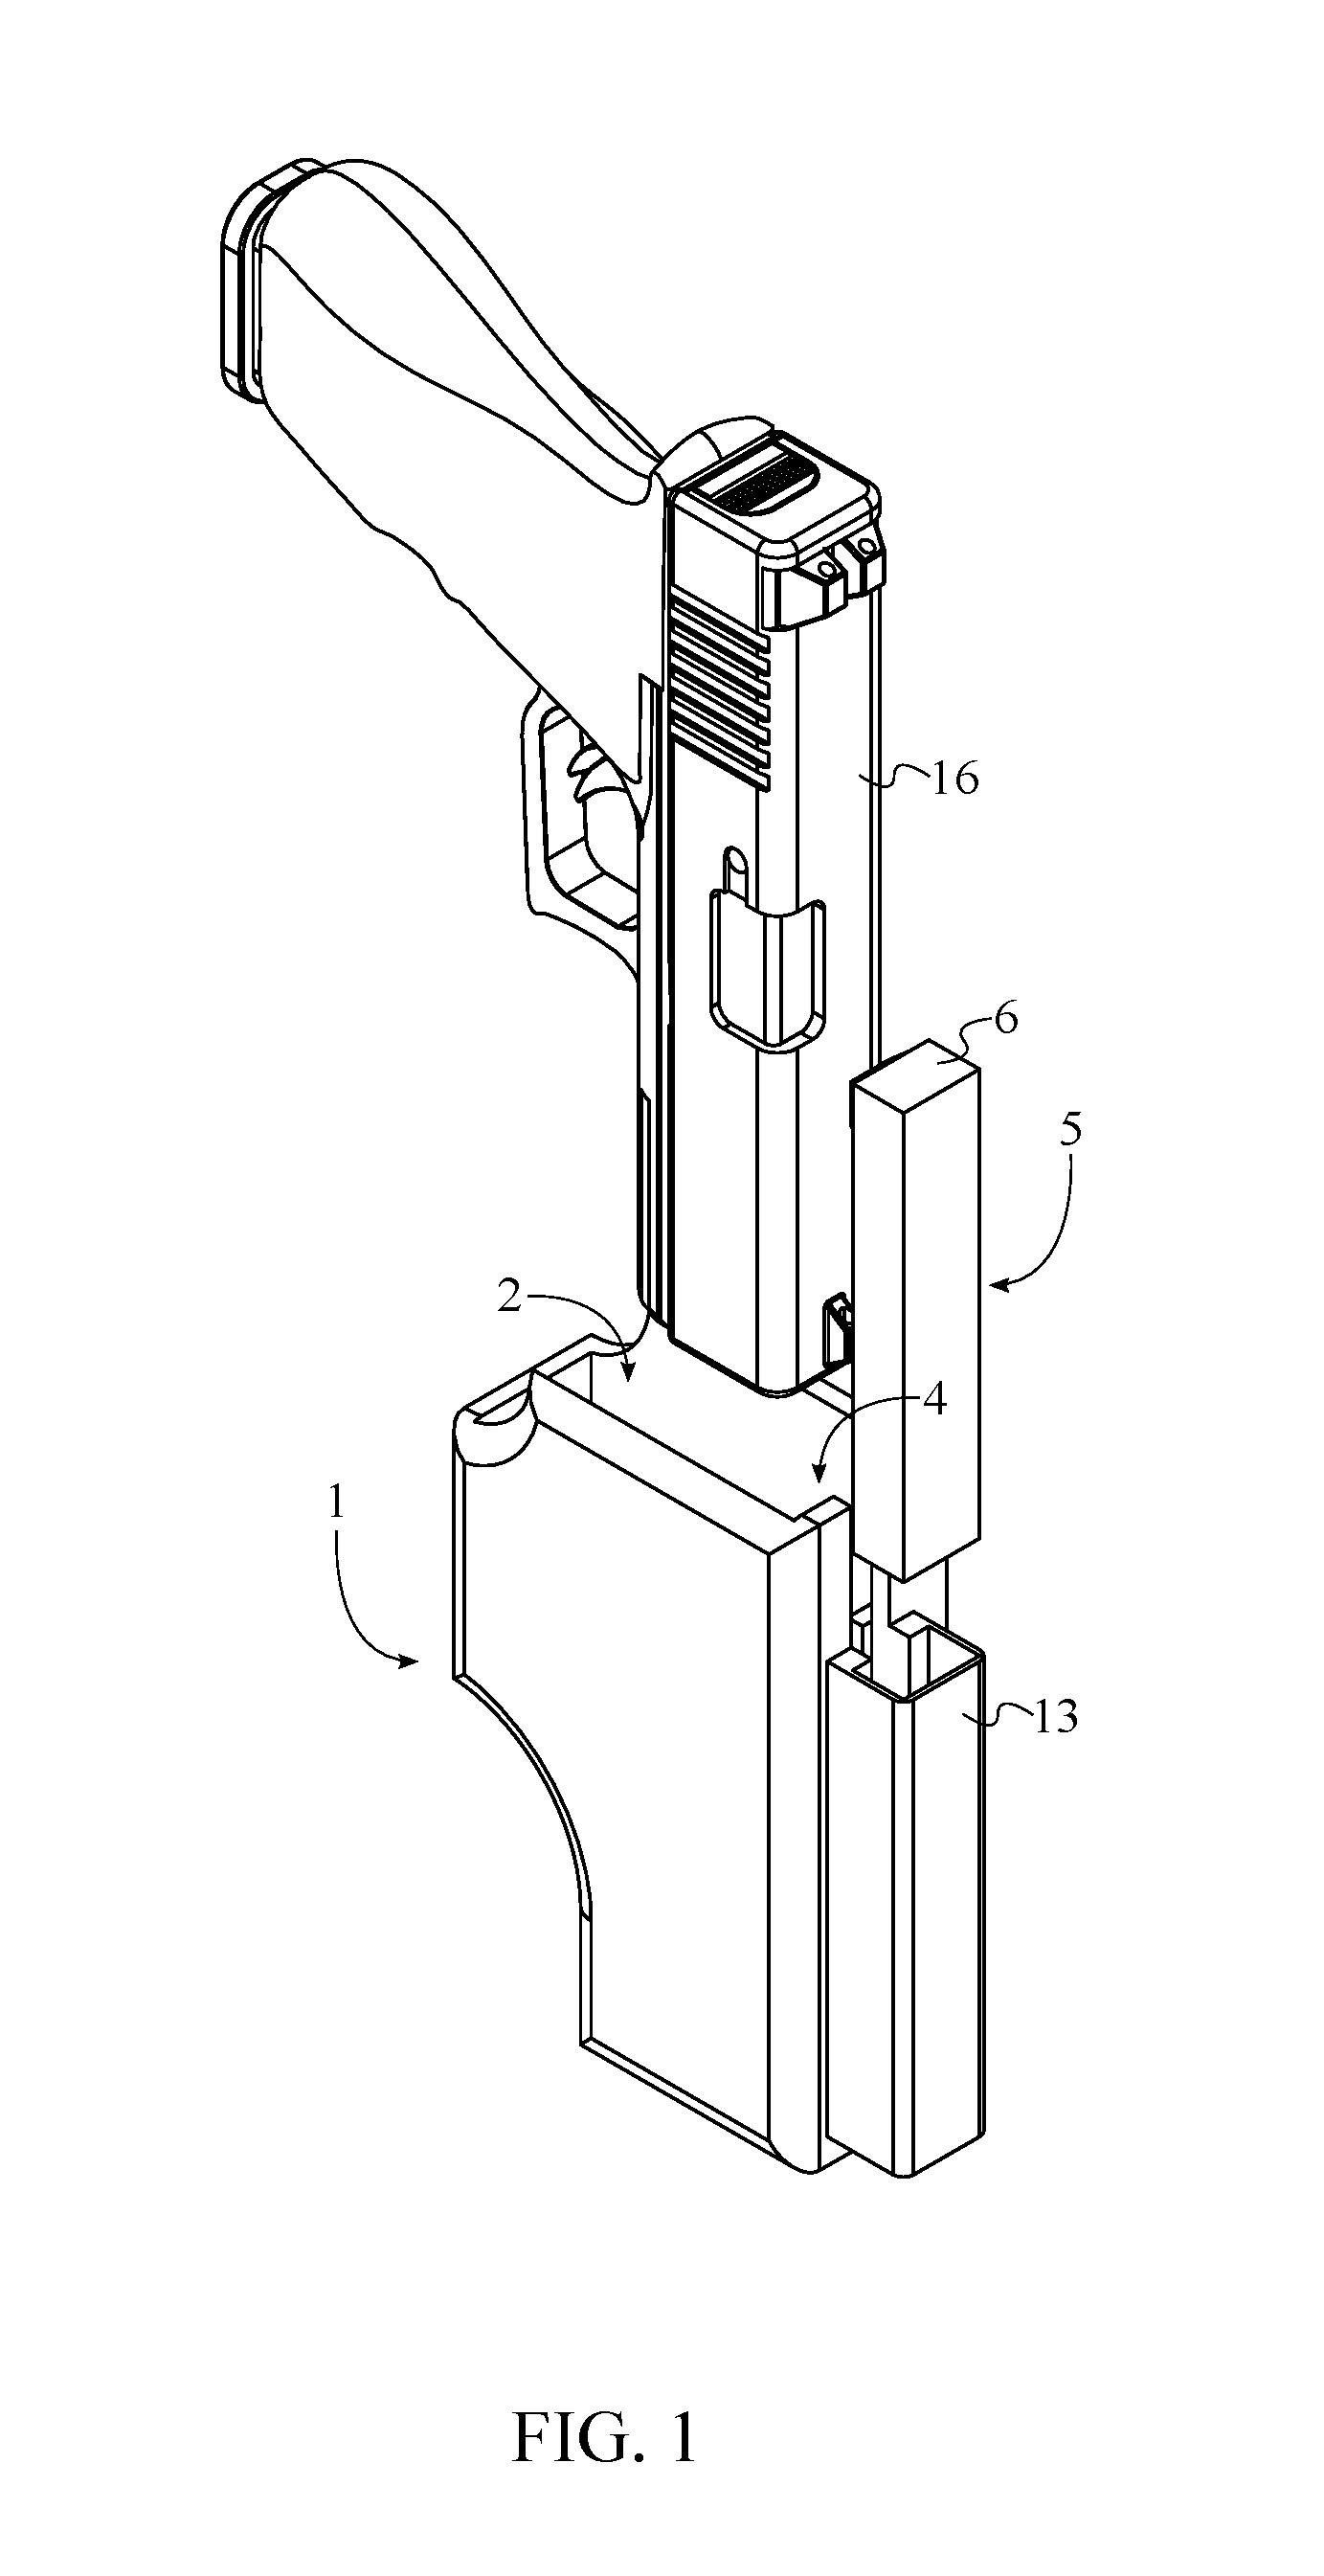 Firearm Monitoring and Tracking System